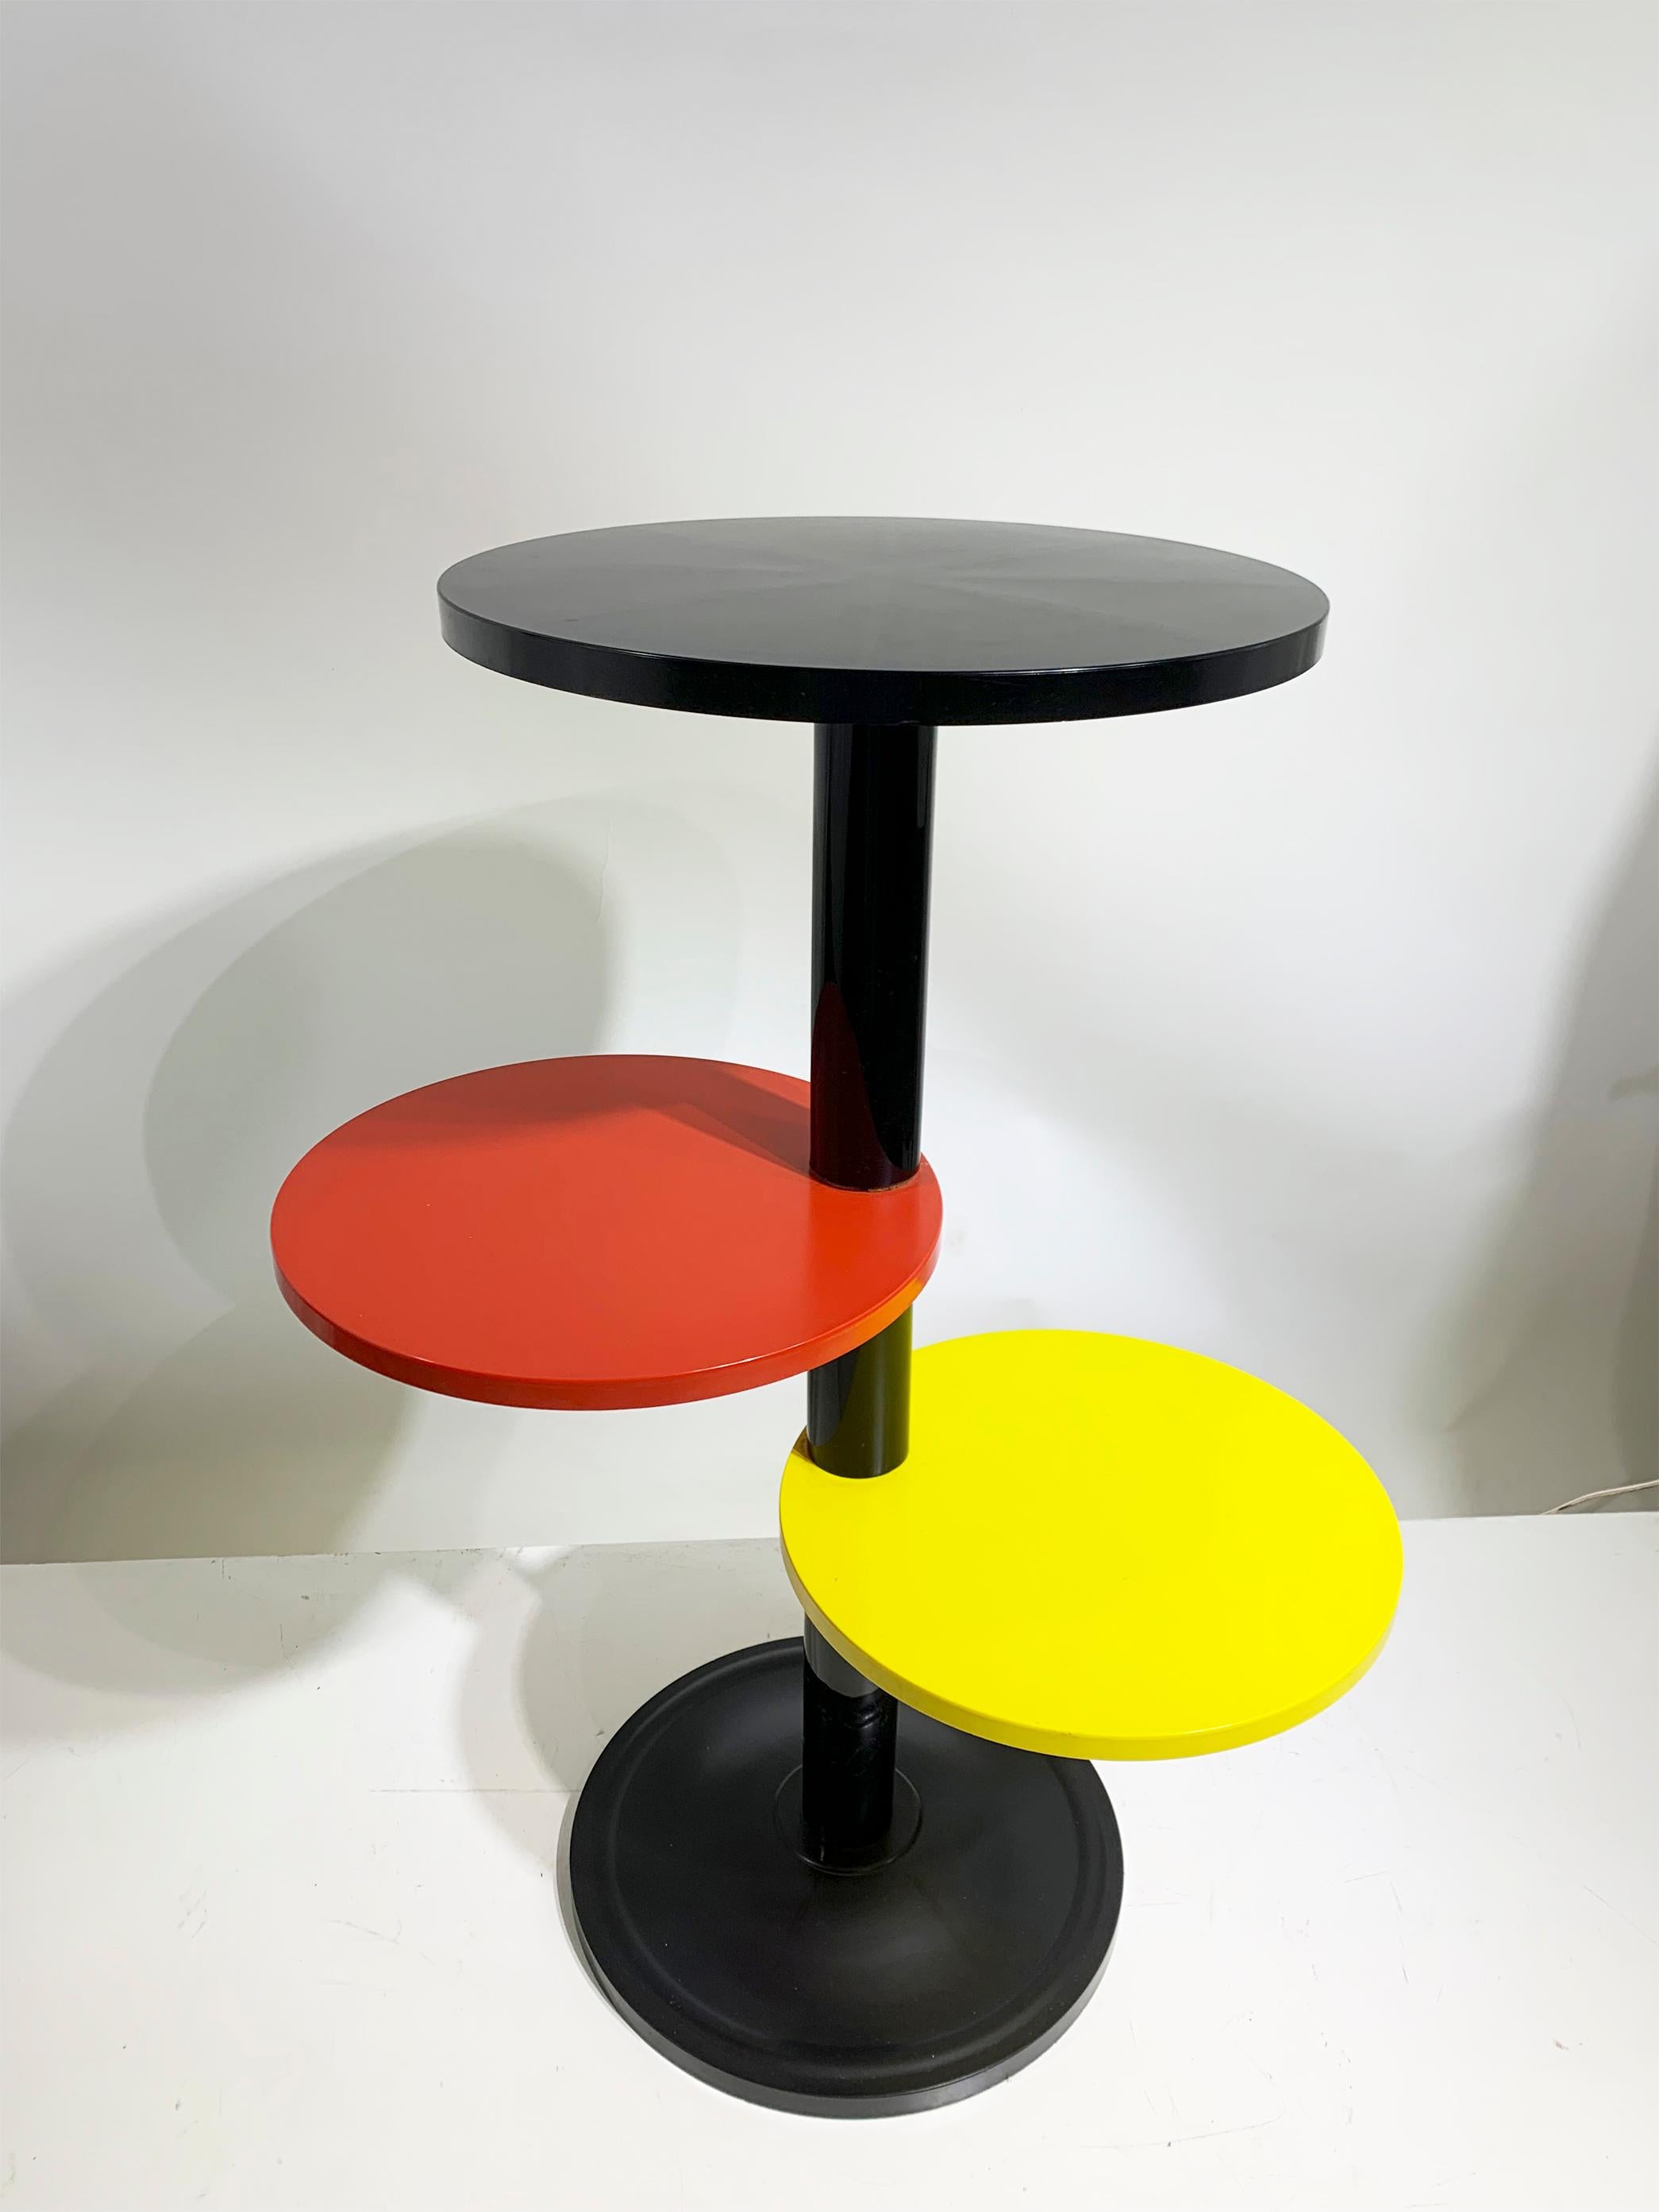 This delightful French plastic table/plant stand, originating from the 1960s, exudes retro charm with its clever design. Featuring circular shelves in striking black, red, and yellow hues, each one playfully offset from the central column, this